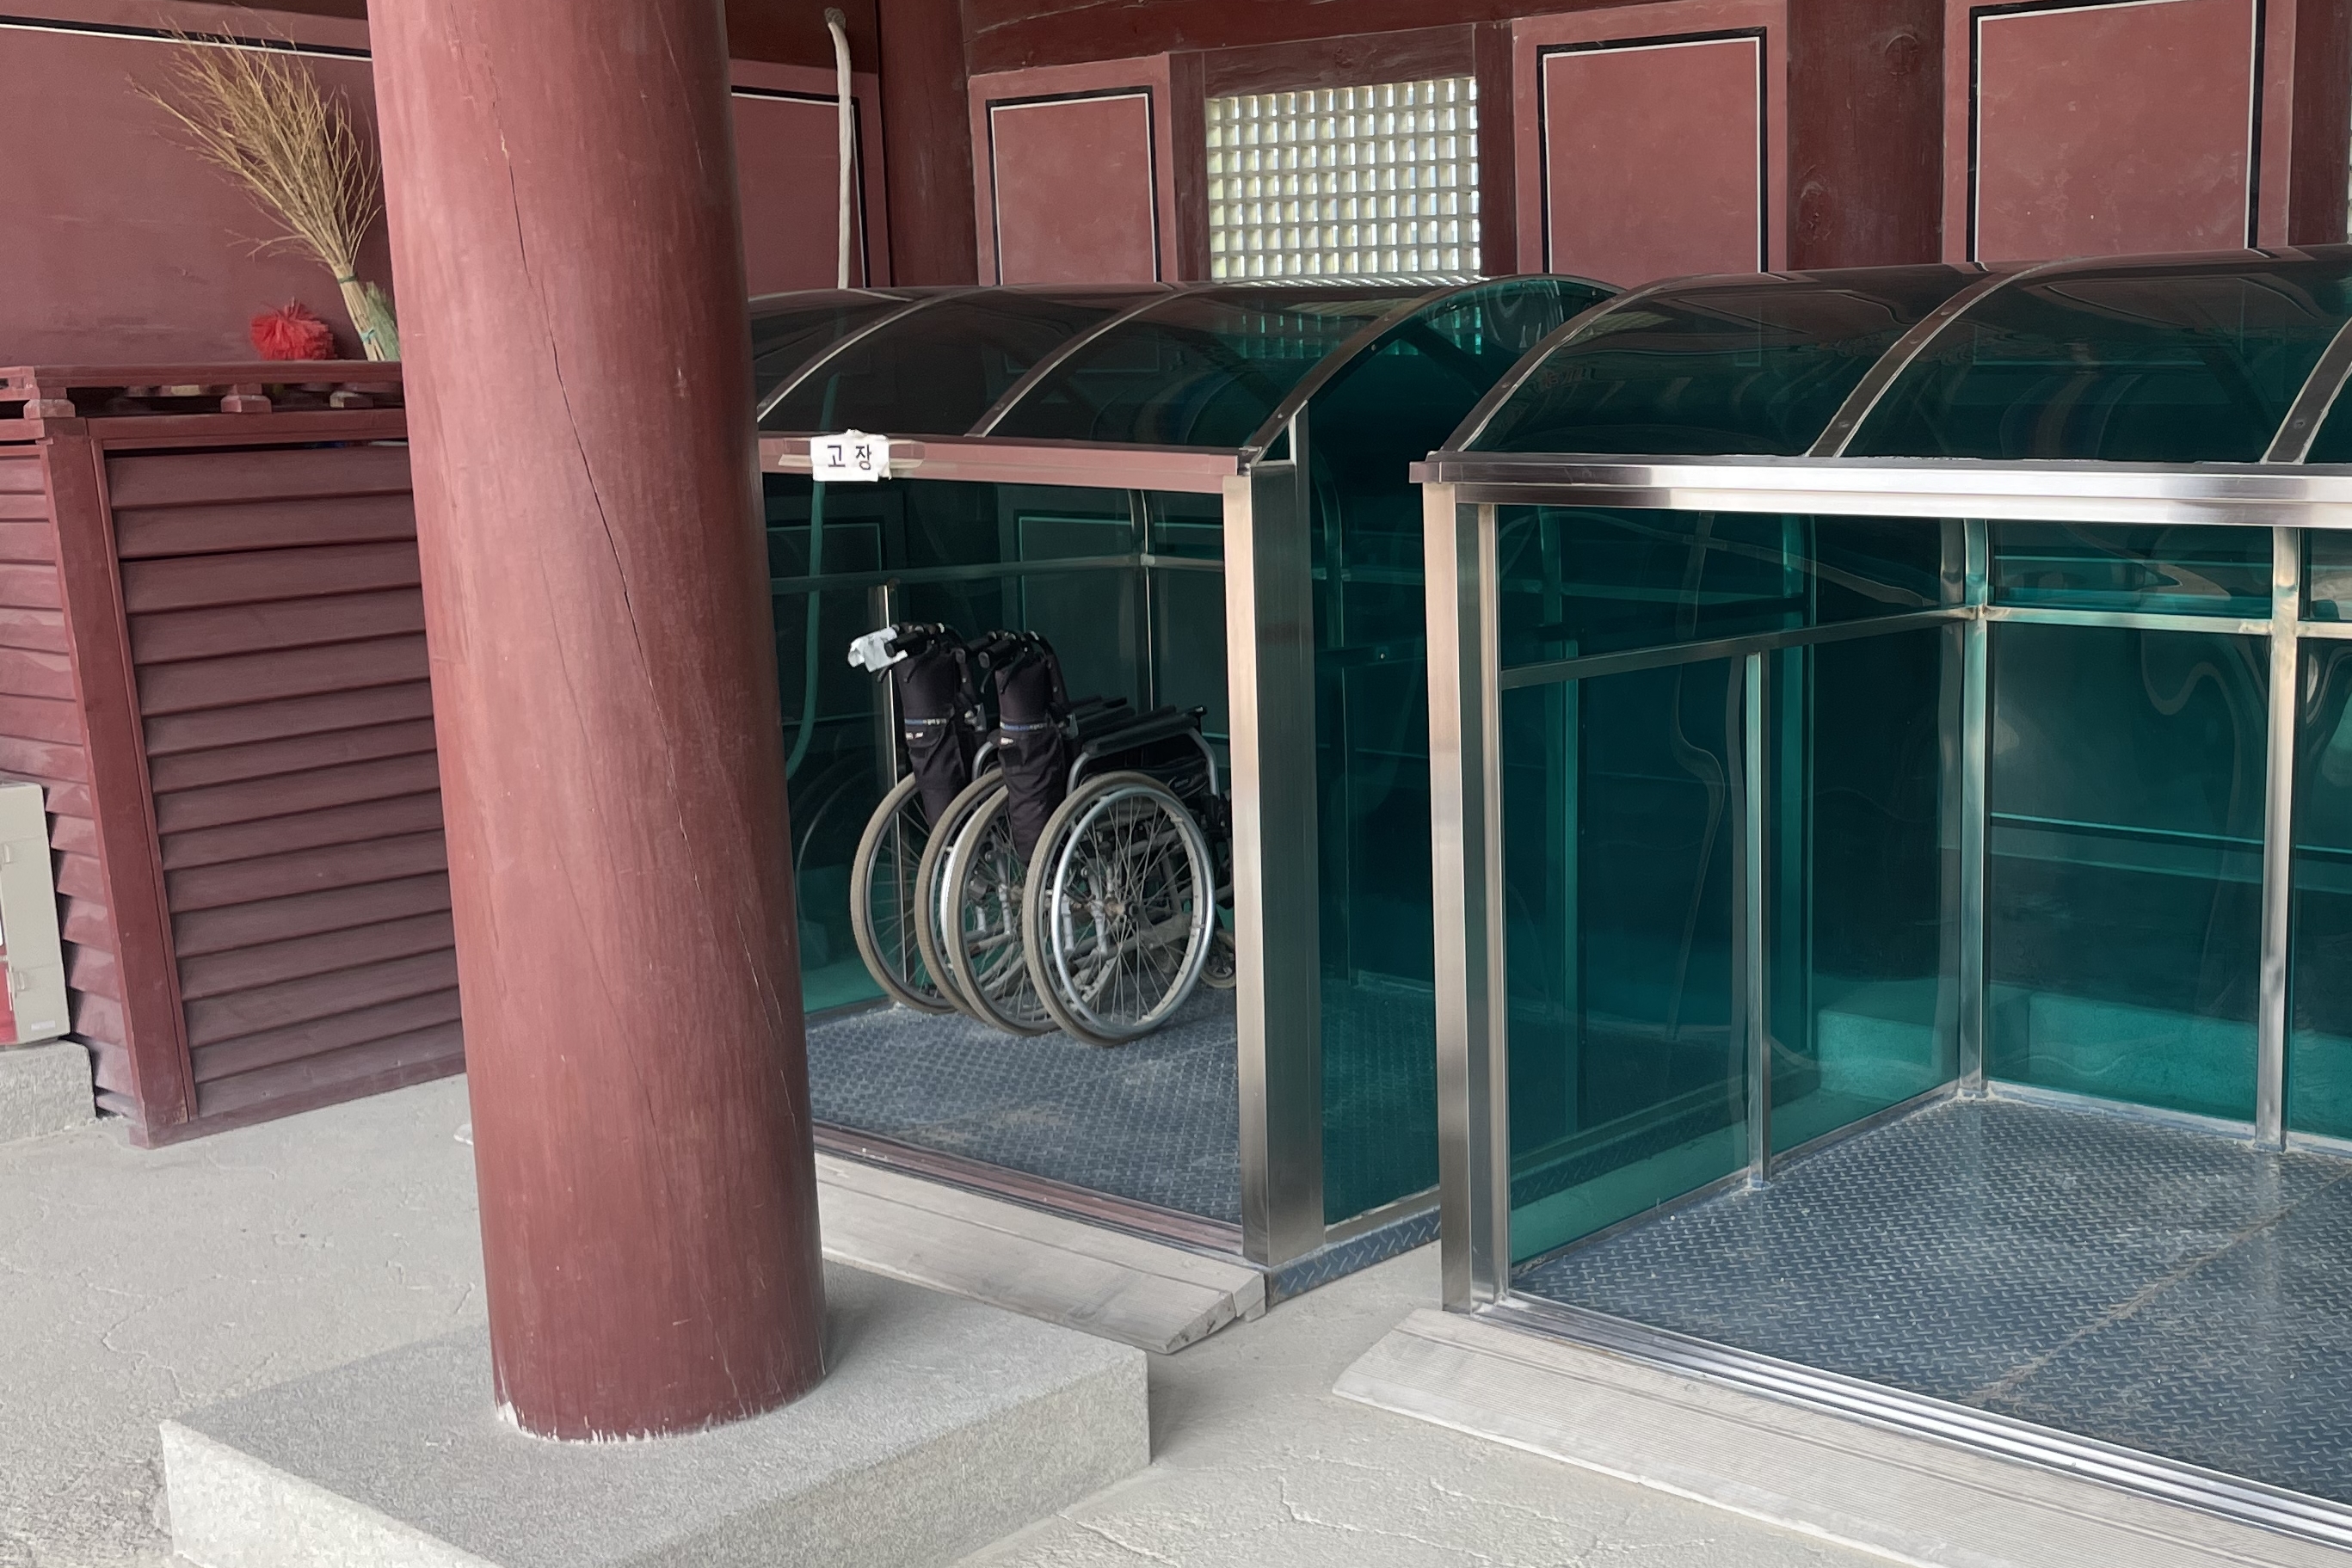 Guide map and information desk0 : Wheelchair rental place at Gyeongbokgung Palace 
